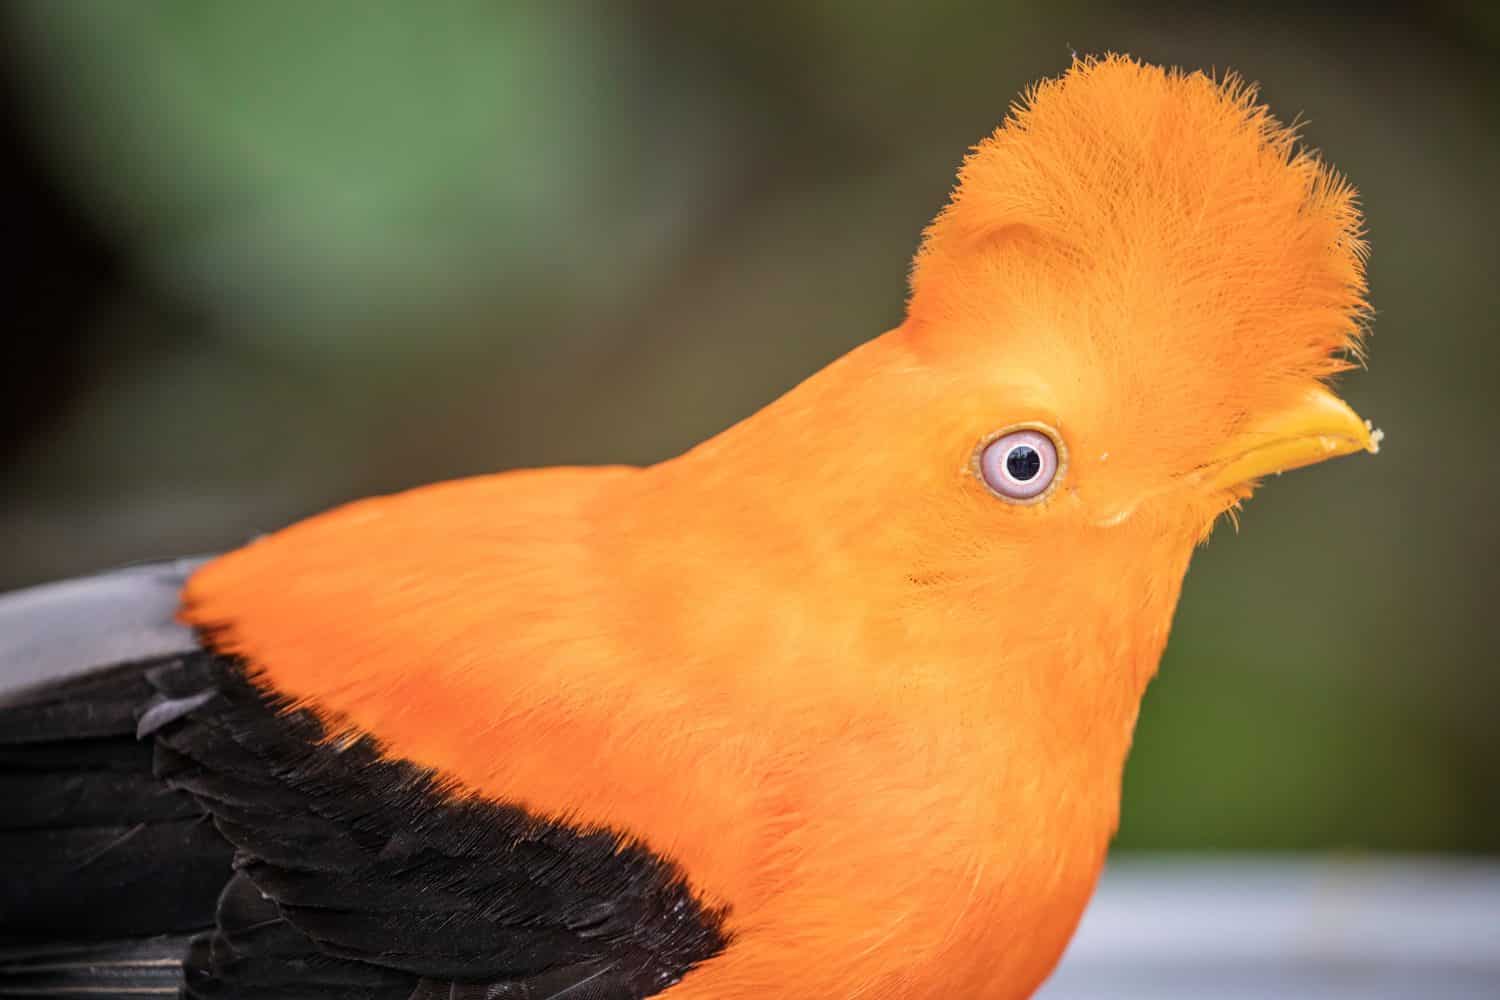 The male Andean cock-of-the-rock (Rupicola peruvianus) is a large passerine bird of the cotinga family native to Andean cloud forests in South America. It is regarded as the national bird of Peru